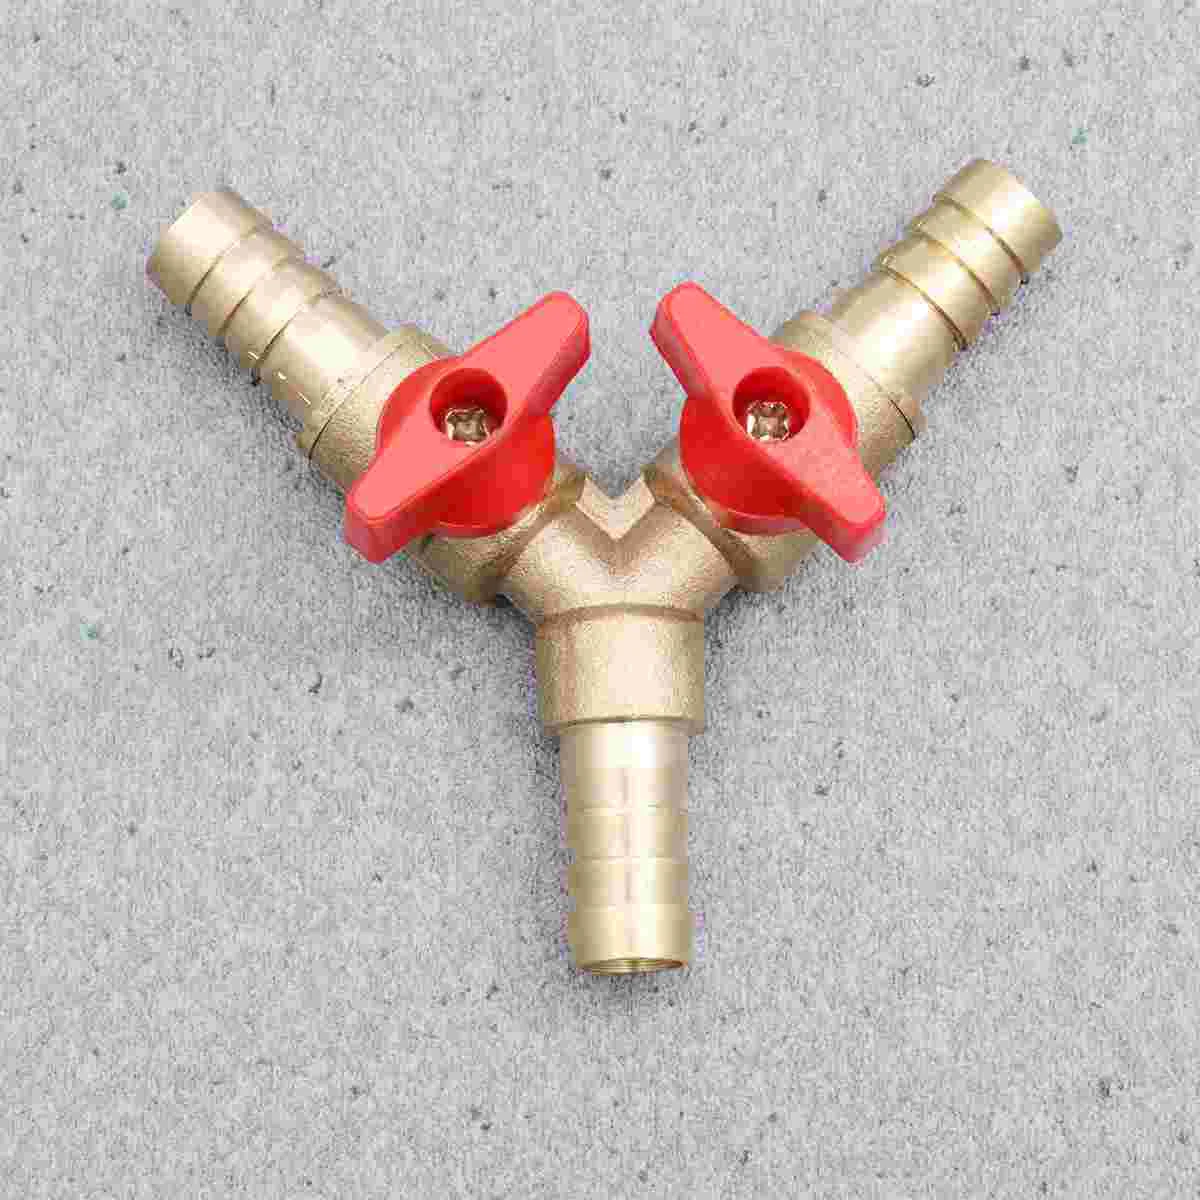 

3 Way Shut Off YShaped 3 Way Union Intersection Brass Shut Off Fitting ( Copper 10mm Golden Red )